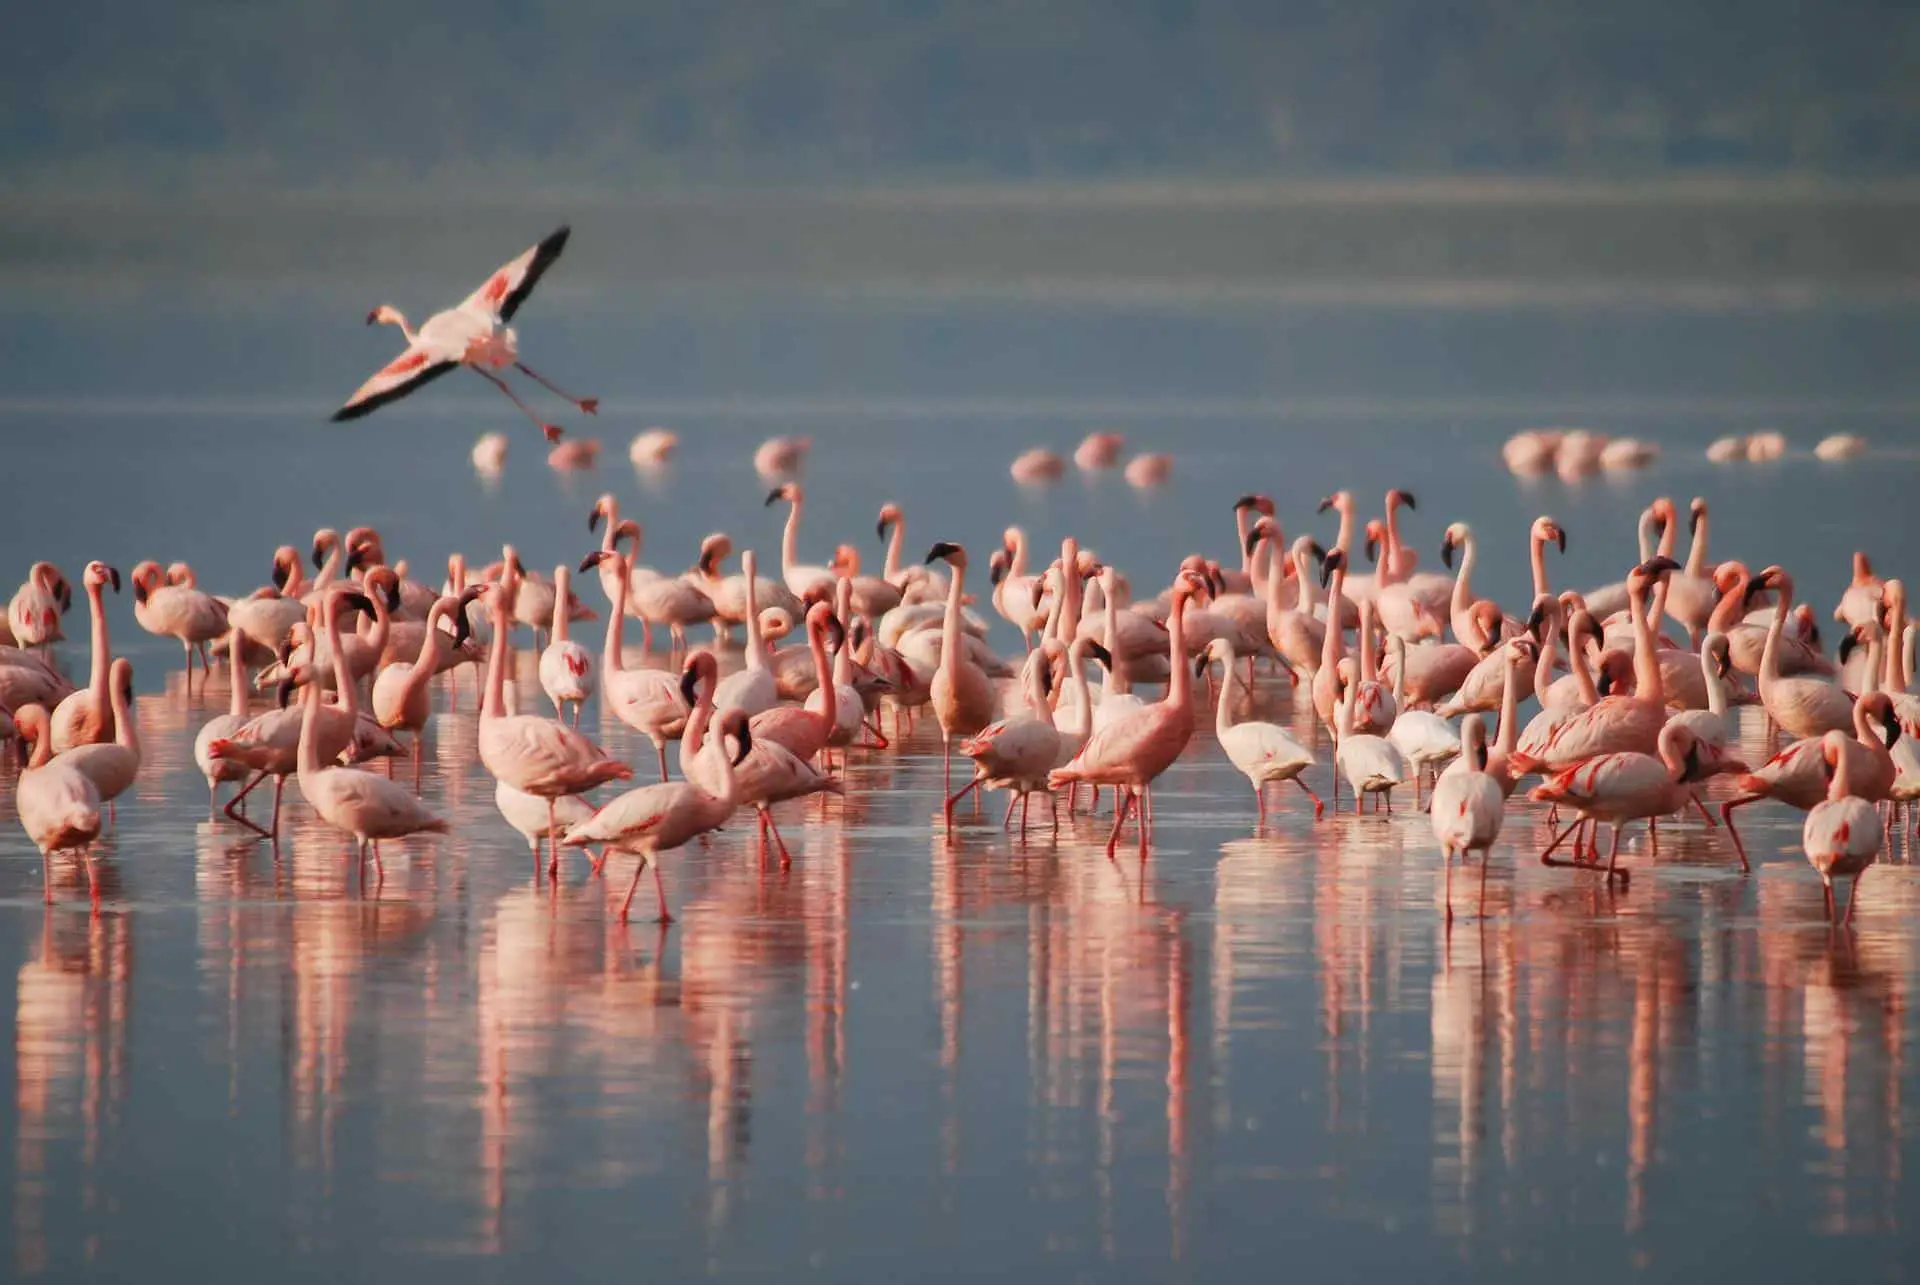 What is a group of flamingos called?